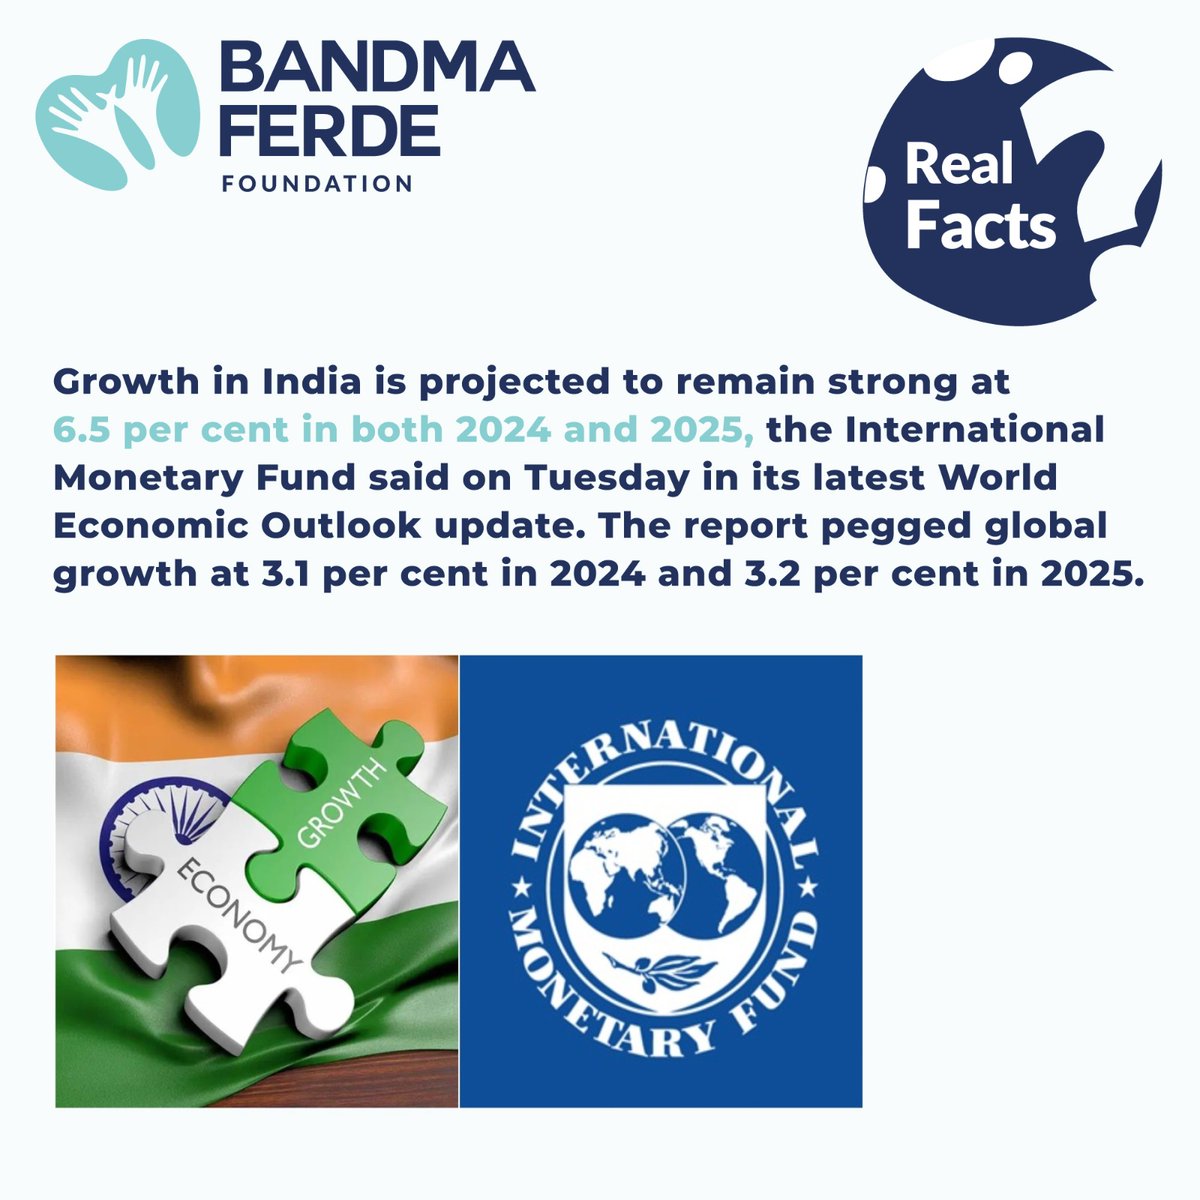 𝐑𝐞𝐚𝐥 𝐅𝐚𝐜𝐭: Growth in India is projected to remain strong at 6.5 per cent in both 2024 and 2025, the International Monetary Fund said on Tuesday in its latest World Economic Outlook update. #Bandmaferdefoundation #Bandmaferde #realfacts #India #factsmatter #NGOIndia #IMF